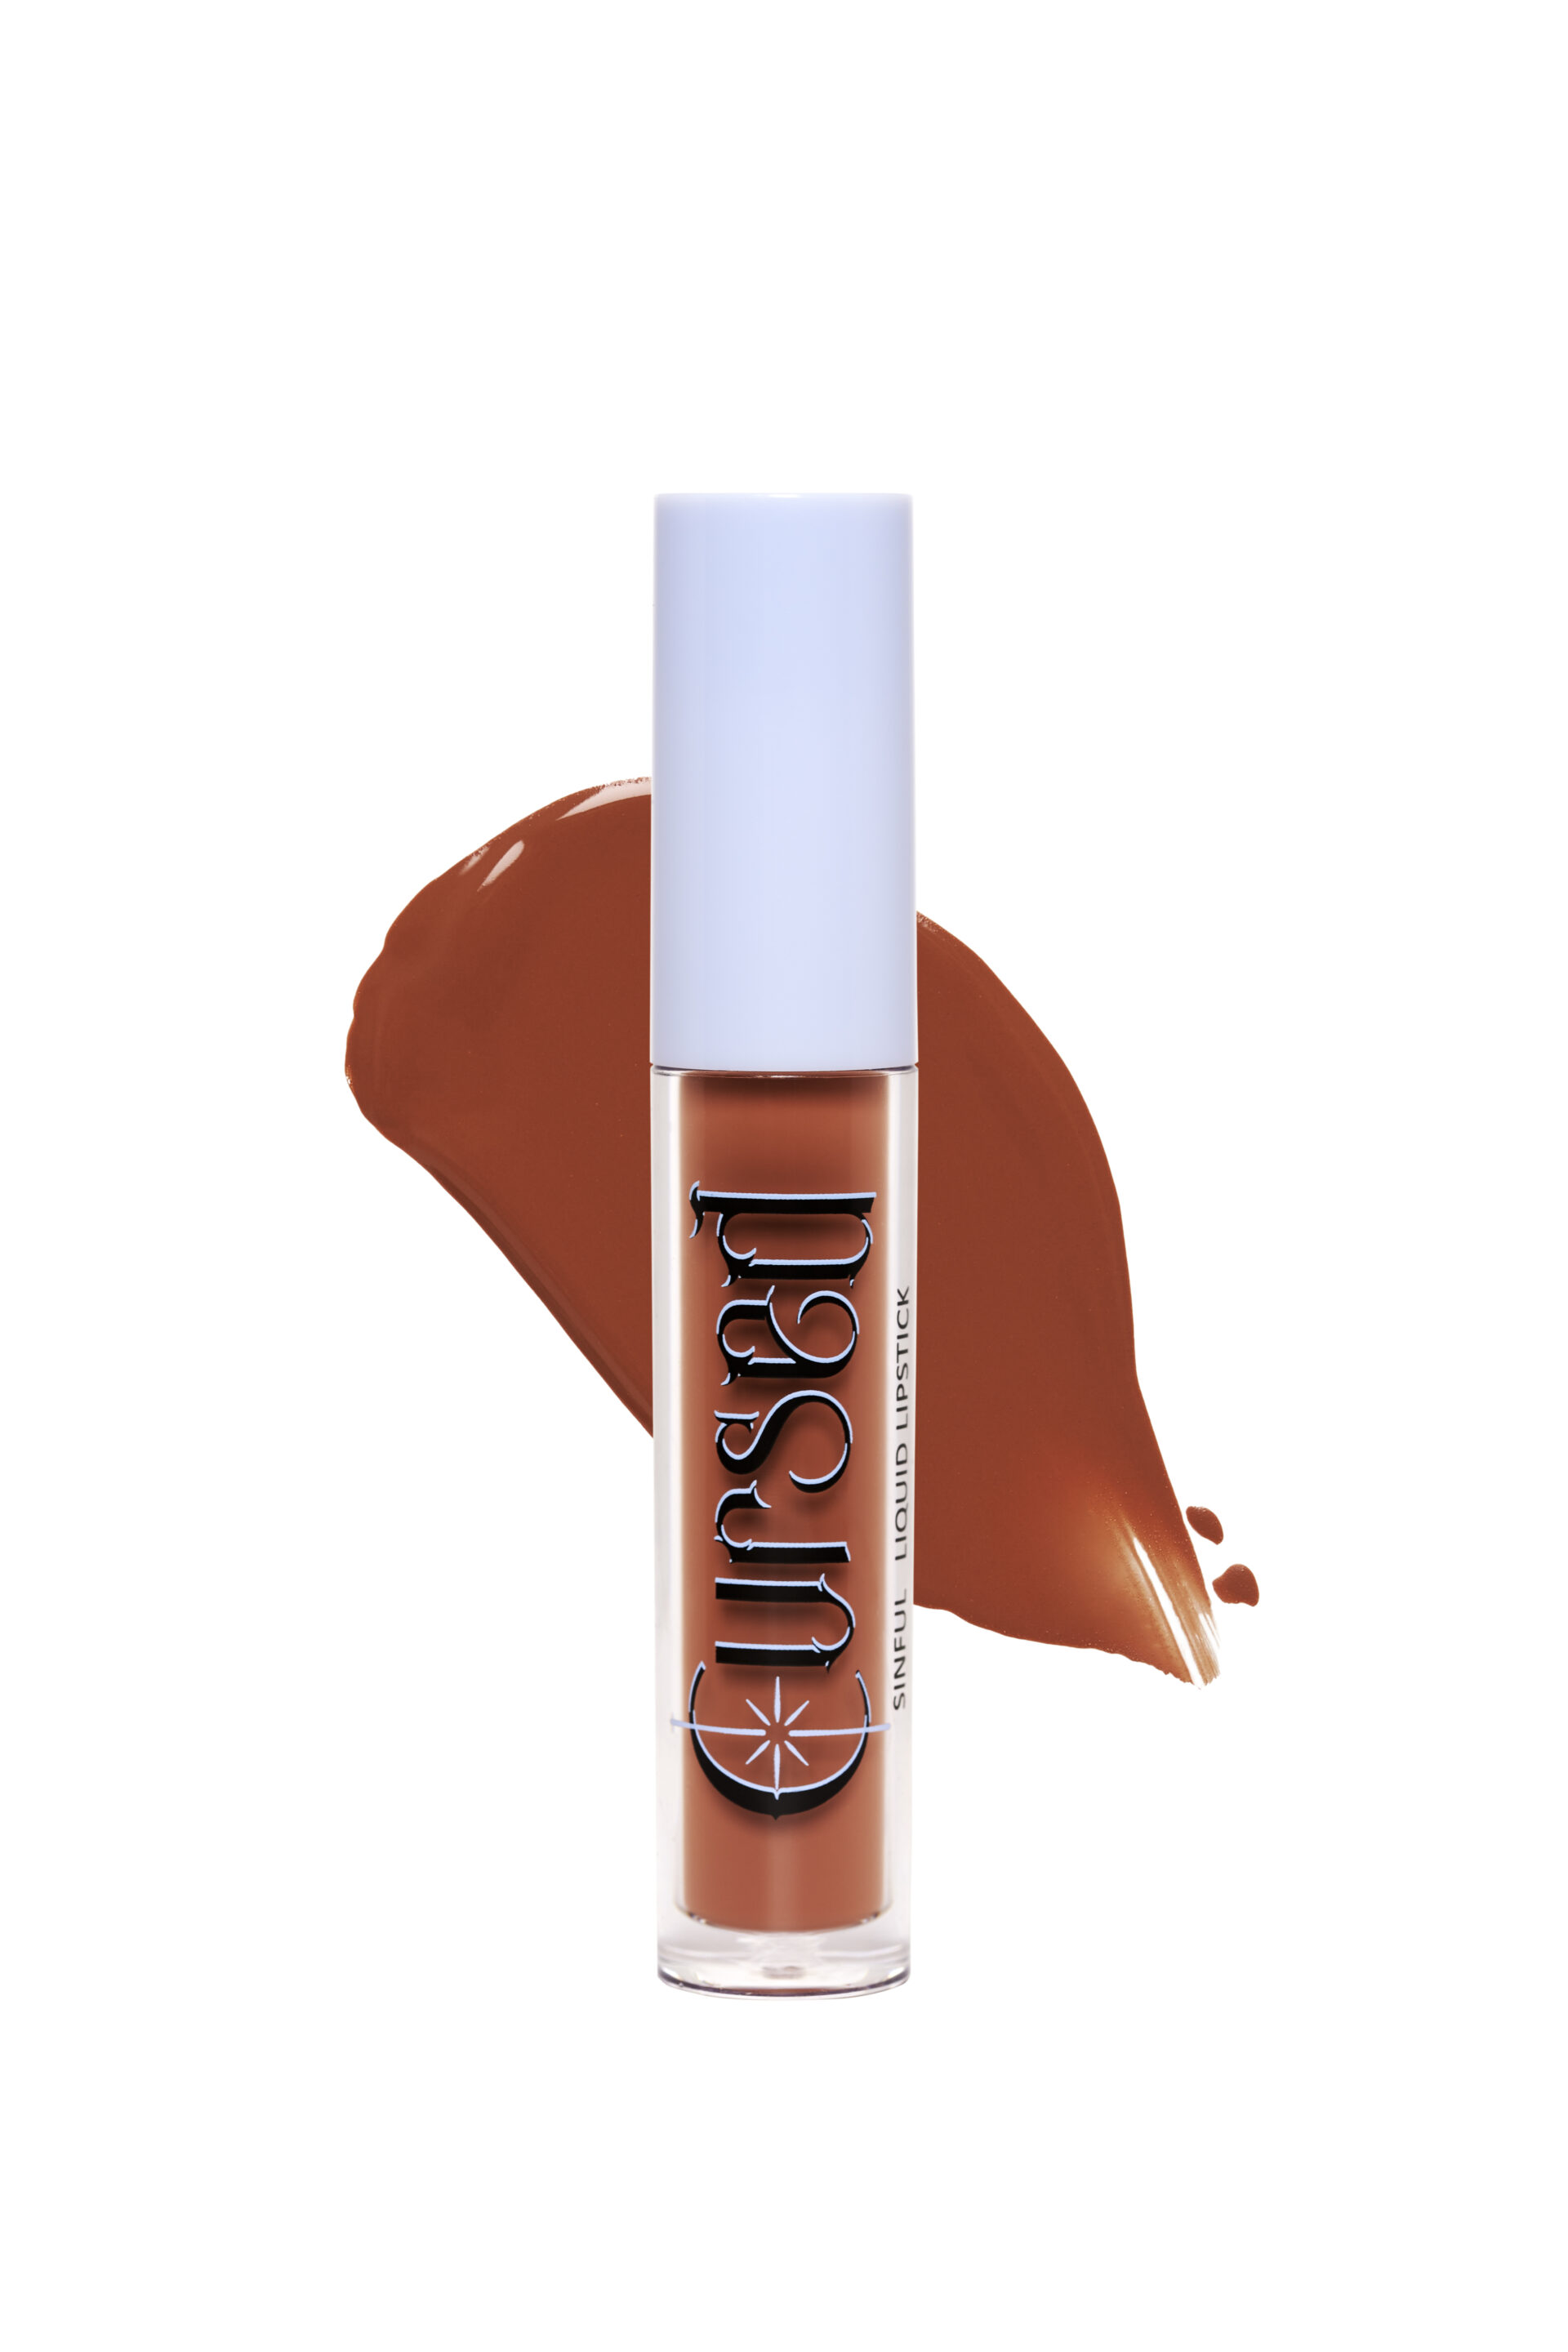 A Packshot with Swatch from the Gloss from Cursed Cosmetics. Photographed by Studio Taupe